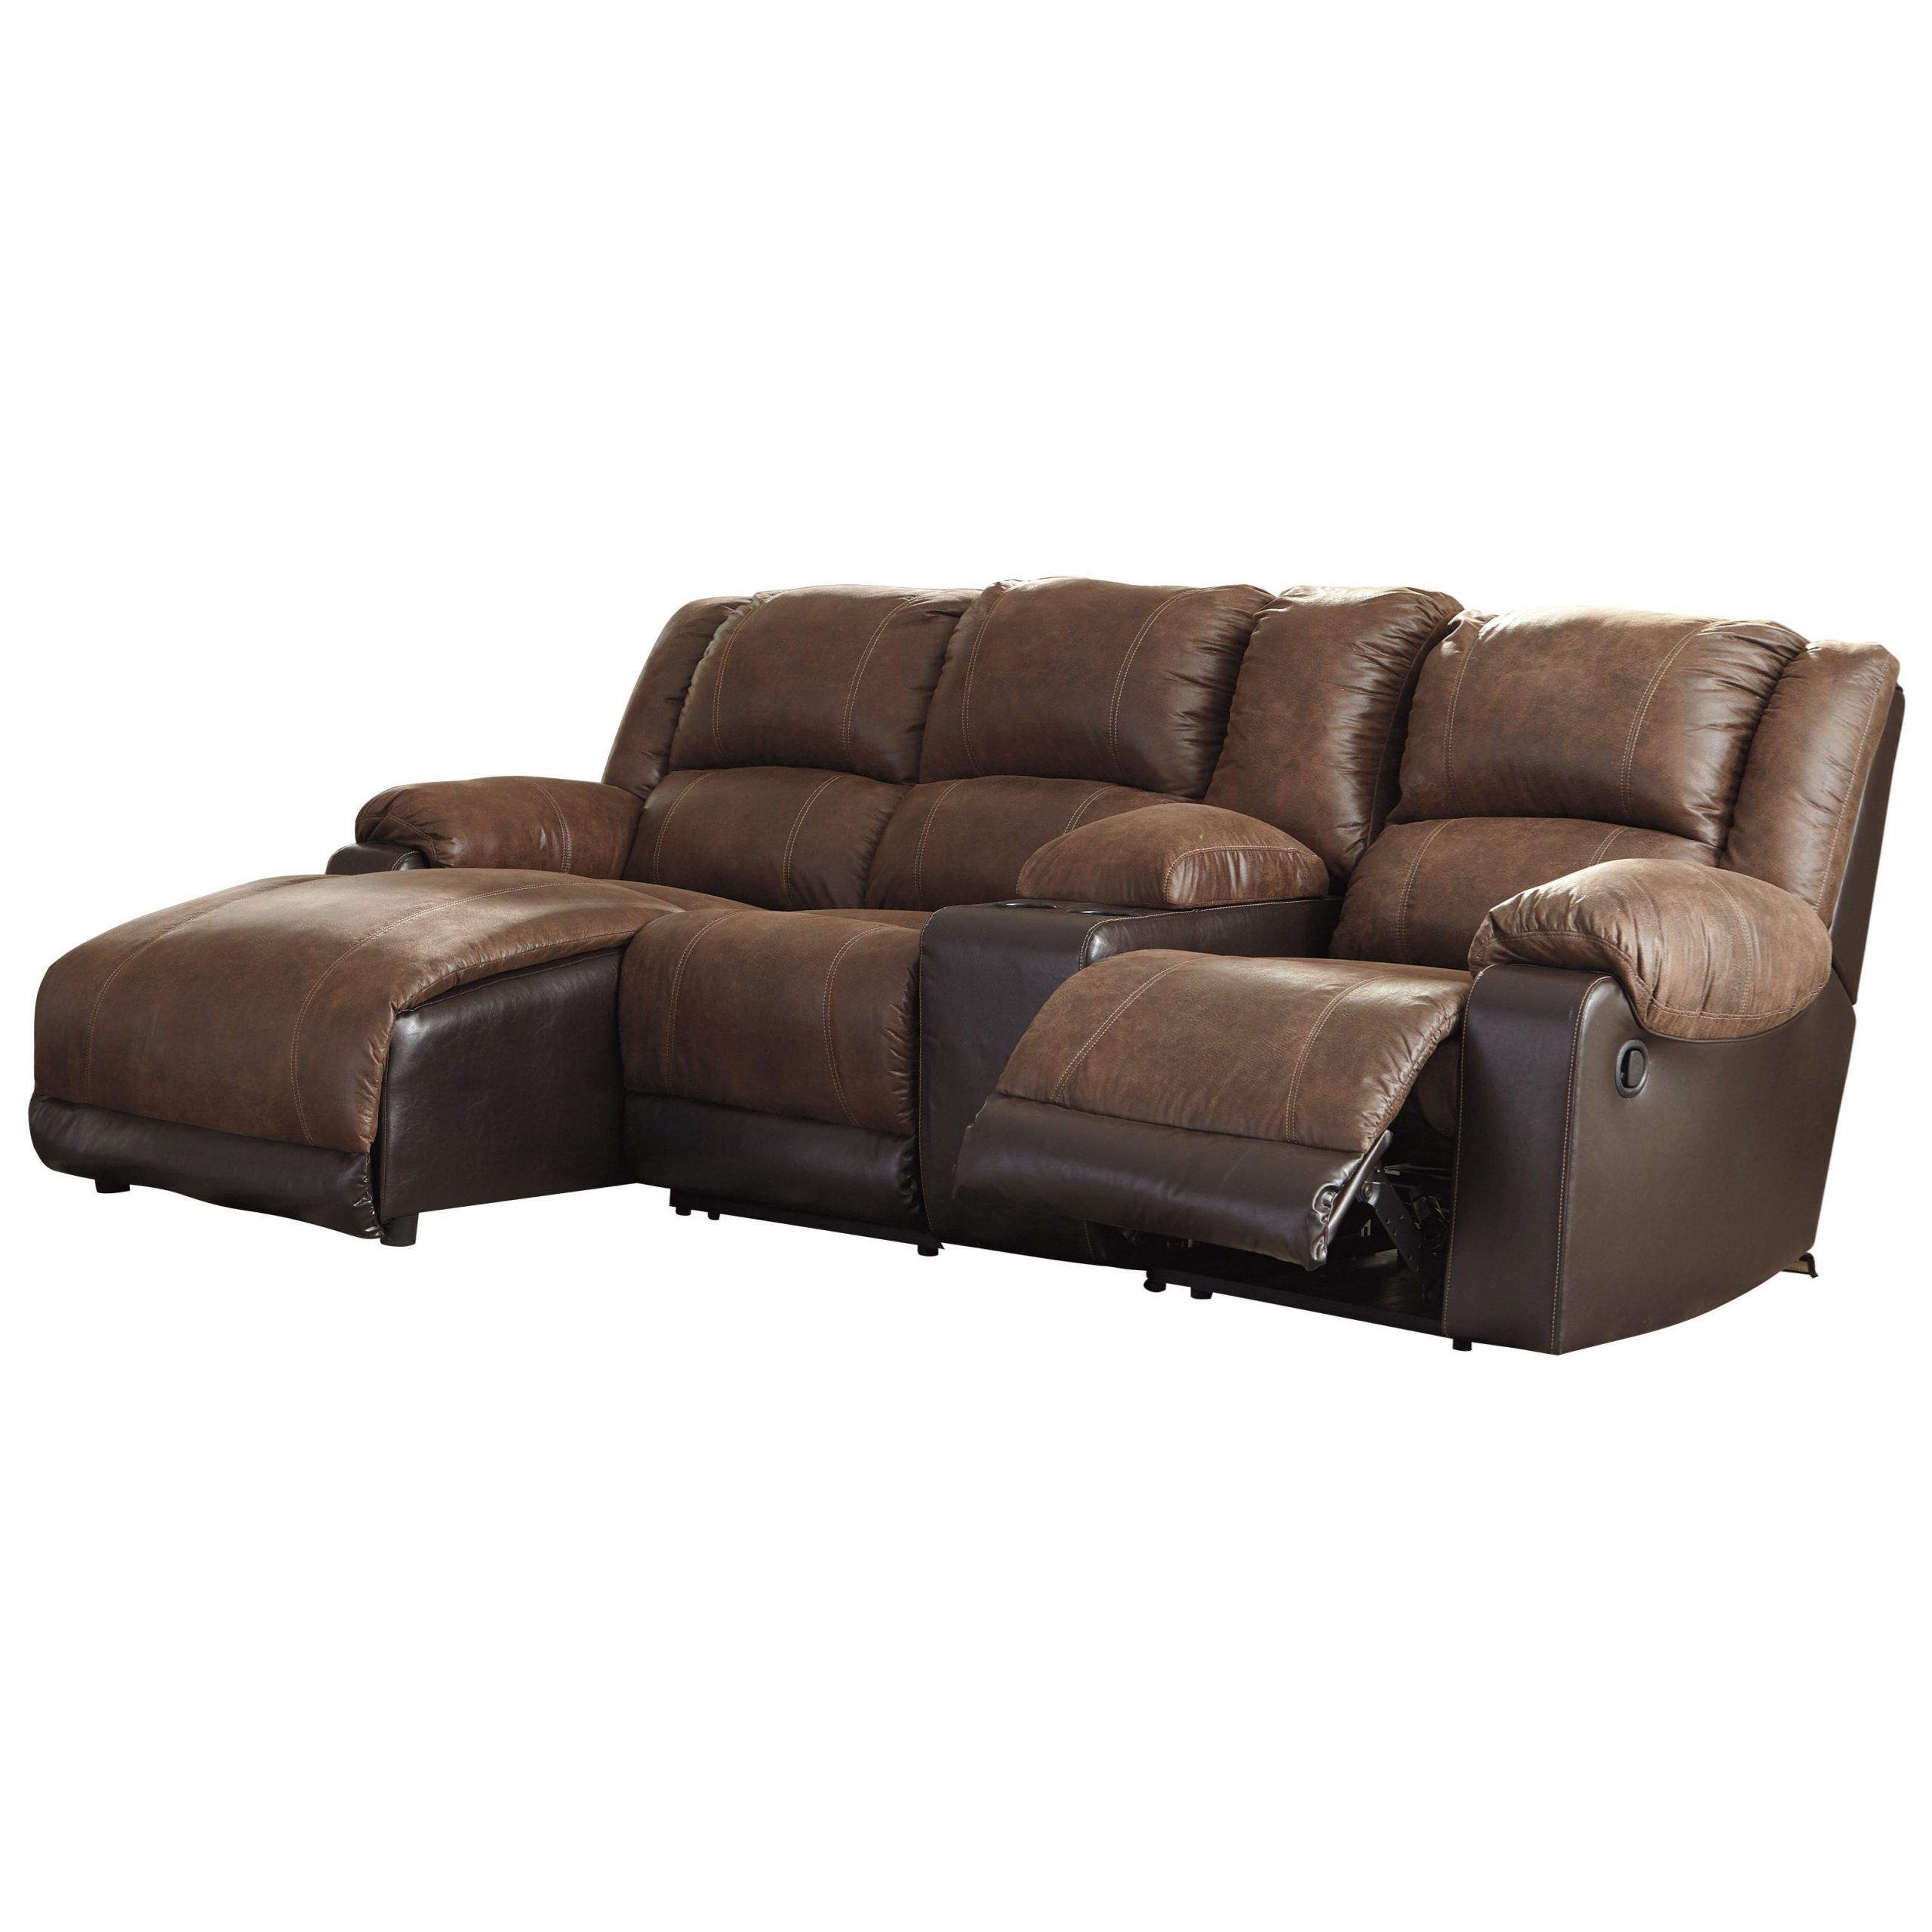 Signature Designashley Nantahala Reclining Chaise Sofa Intended For Celine Sectional Futon Sofas With Storage Reclining Couch (View 6 of 15)